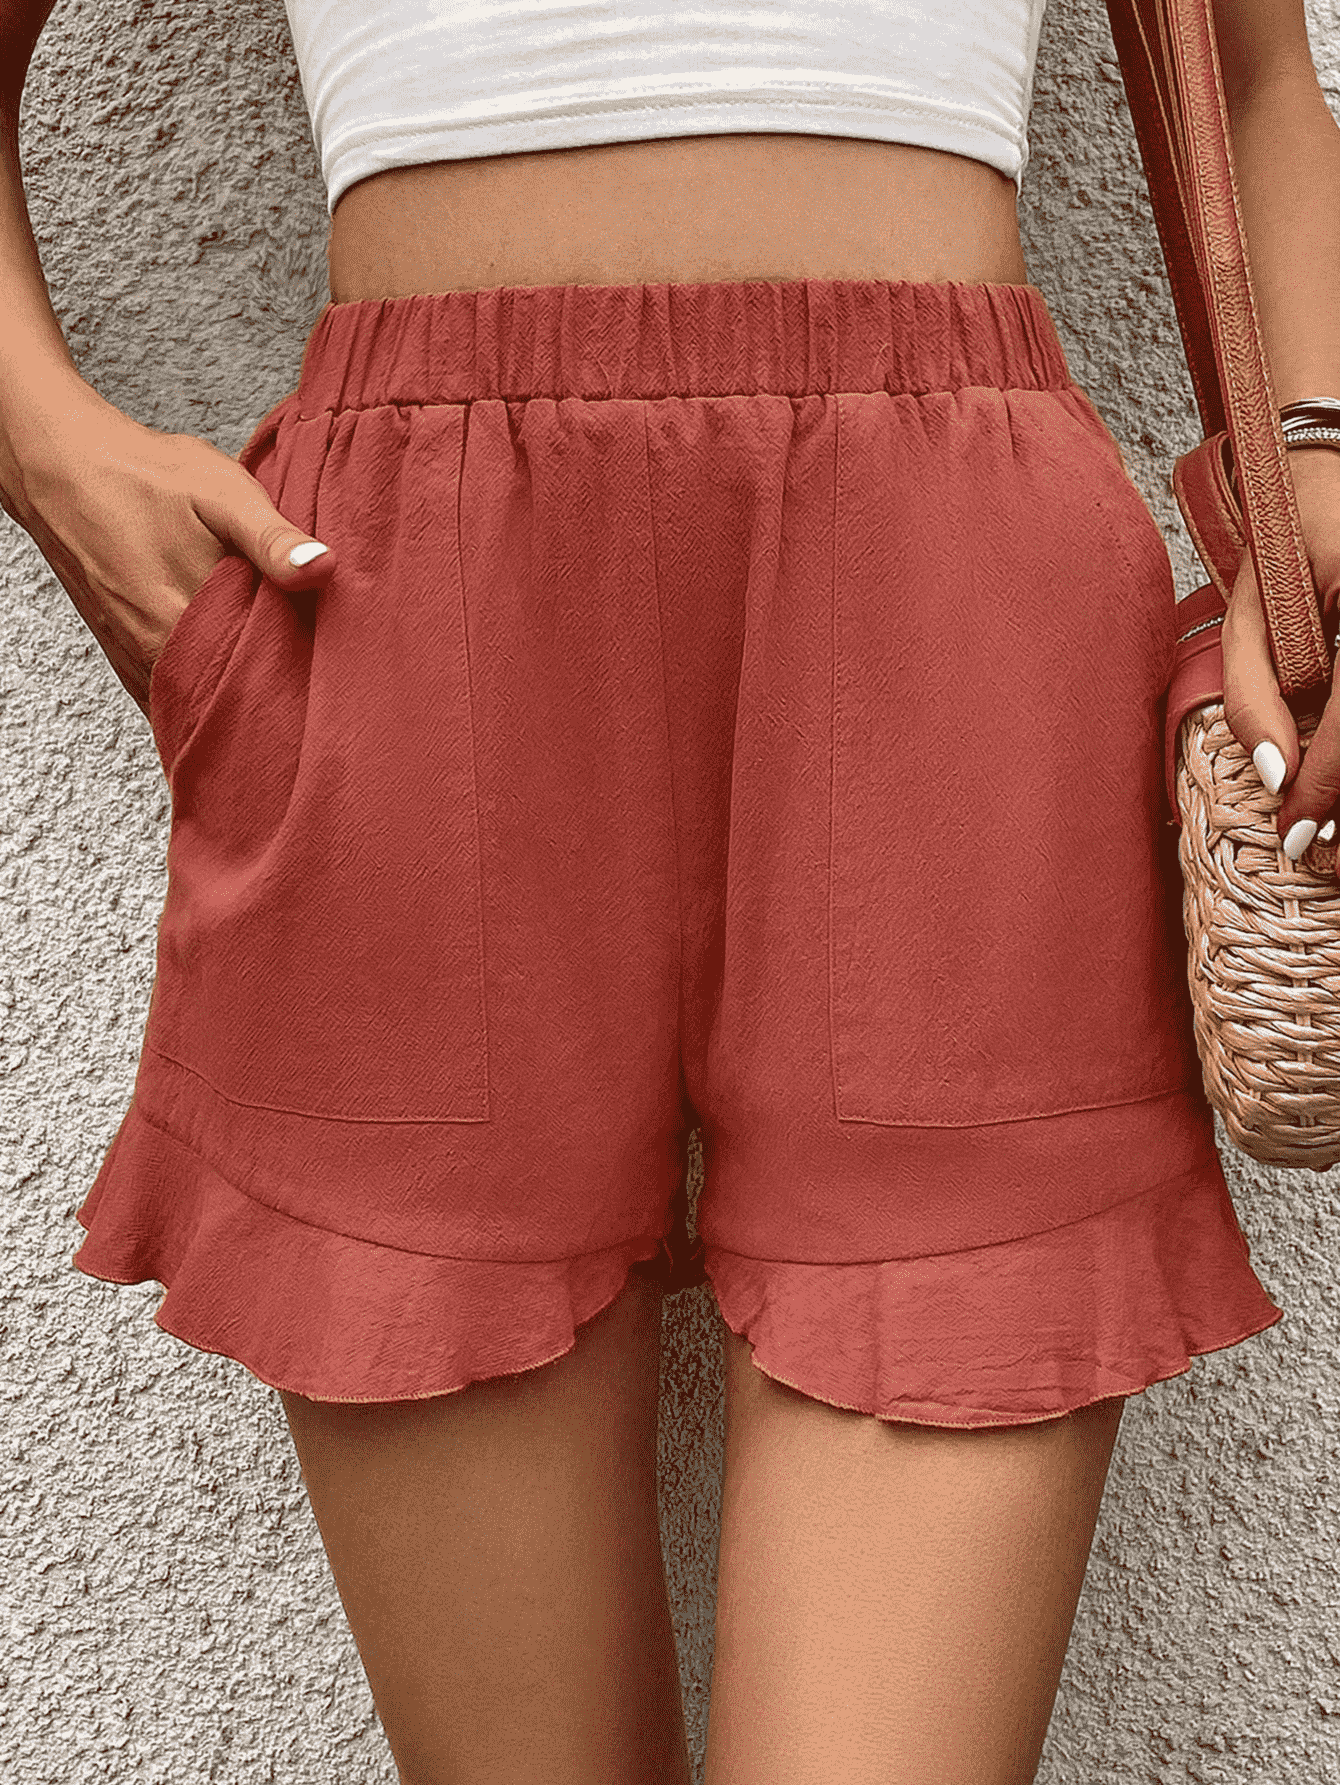 Ruffle Trim Shorts with Pocket - Red / S - Women’s Clothing & Accessories - Shorts - 1 - 2024